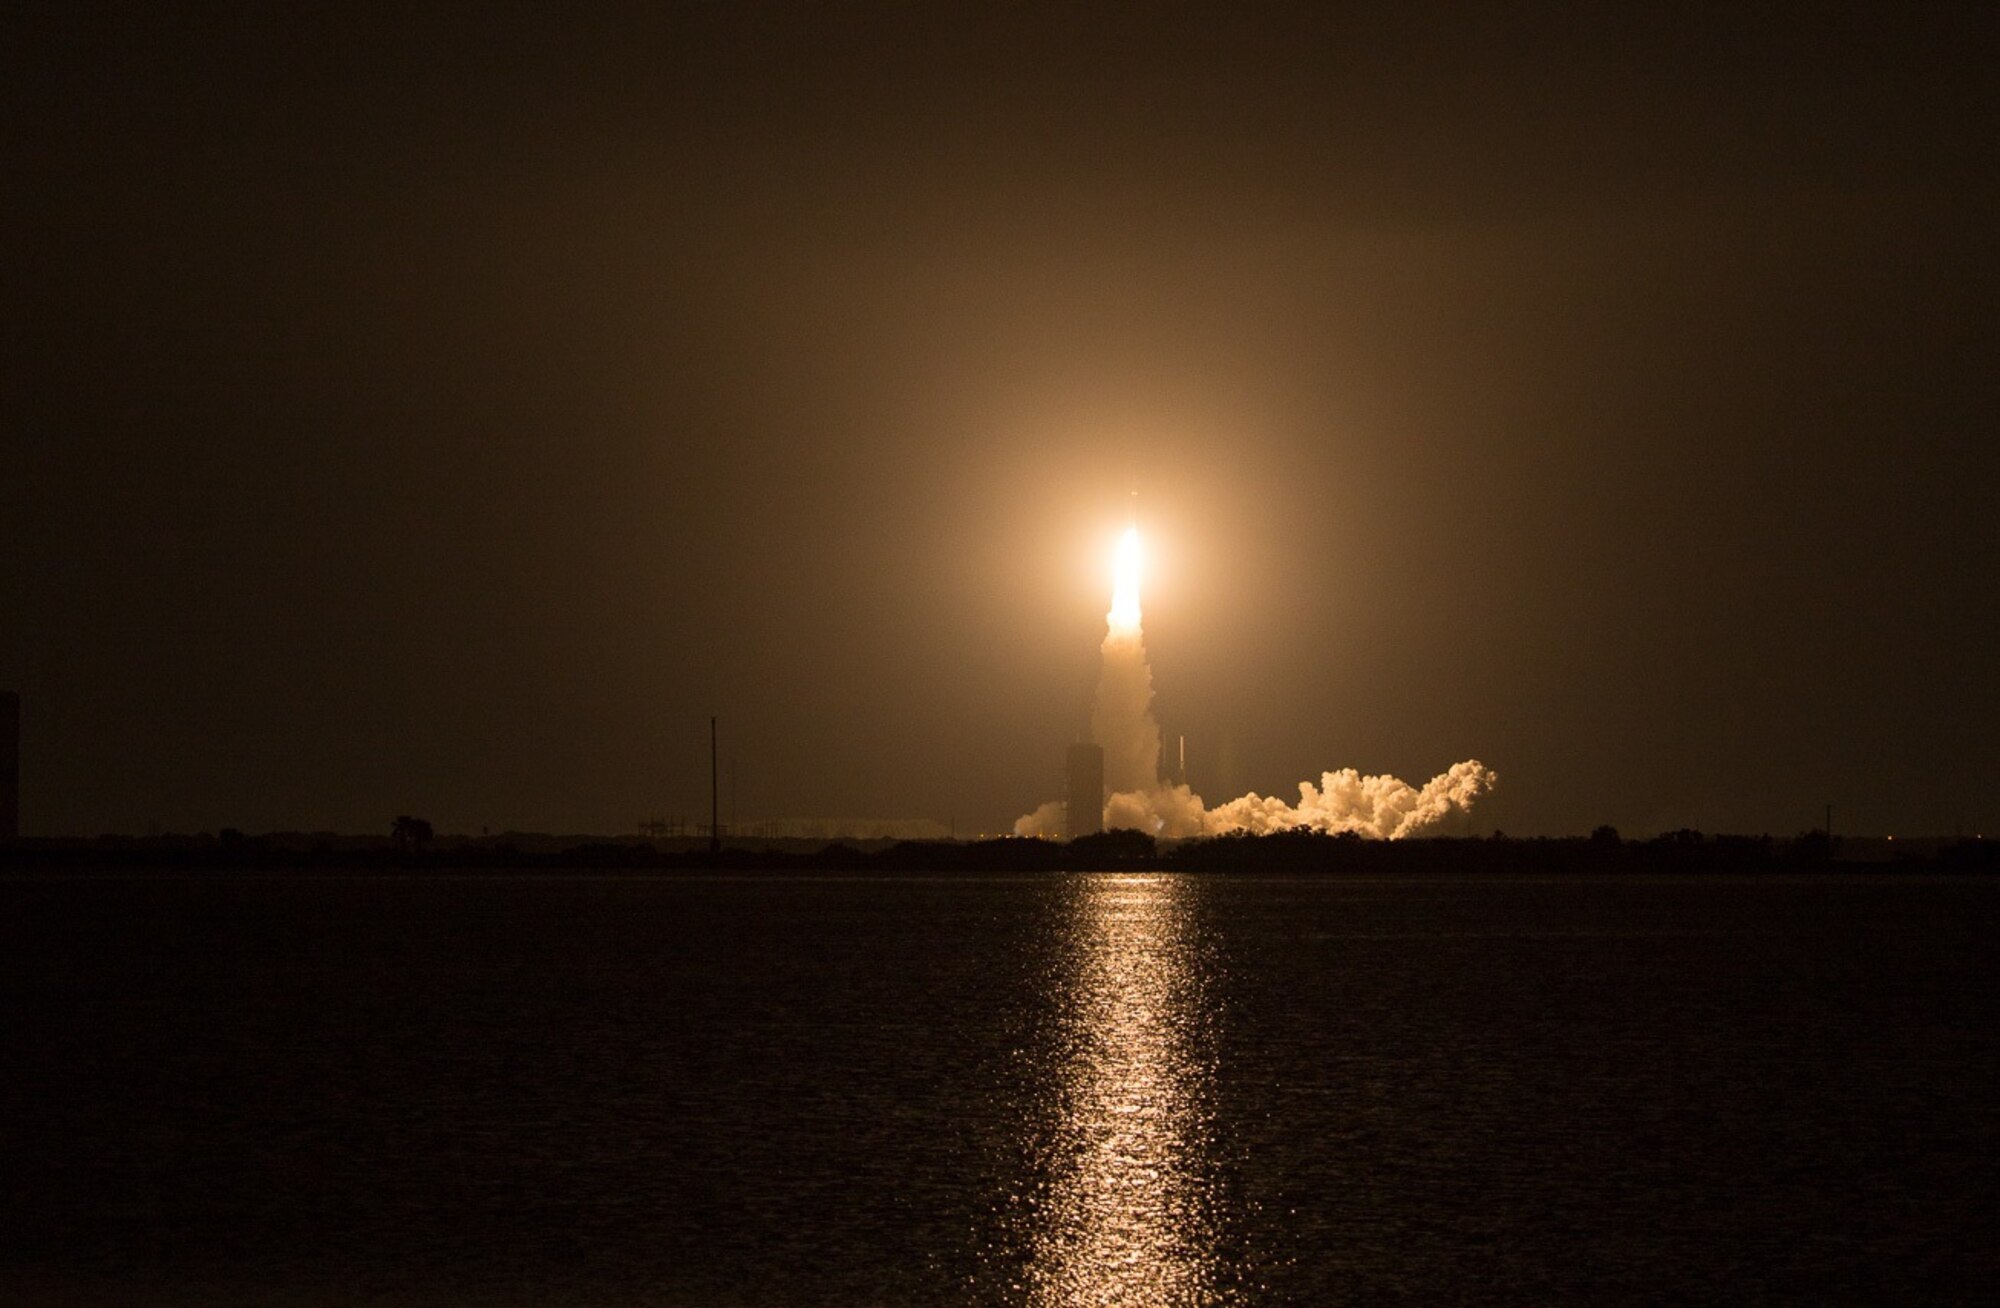 The U.S. Air Force’s 45th Space Wing helped successfully launch the fourth Mobile User Objective System (MUOS) satellite aboard a United Launch Alliance Atlas V rocket from Launch Complex 40 here Sept. 2, 2015, from Cape Canaveral Air Force Station, Fla., at 6:18 a.m. EDT. The U.S. Navy-delivered MUOS is a next-generation narrowband tactical satellite communications system, built by Lockheed Martin, designed to significantly improve ground communications for U.S. forces on the move. (Photo by Dawn Haworth/Spaceflight Insider) 